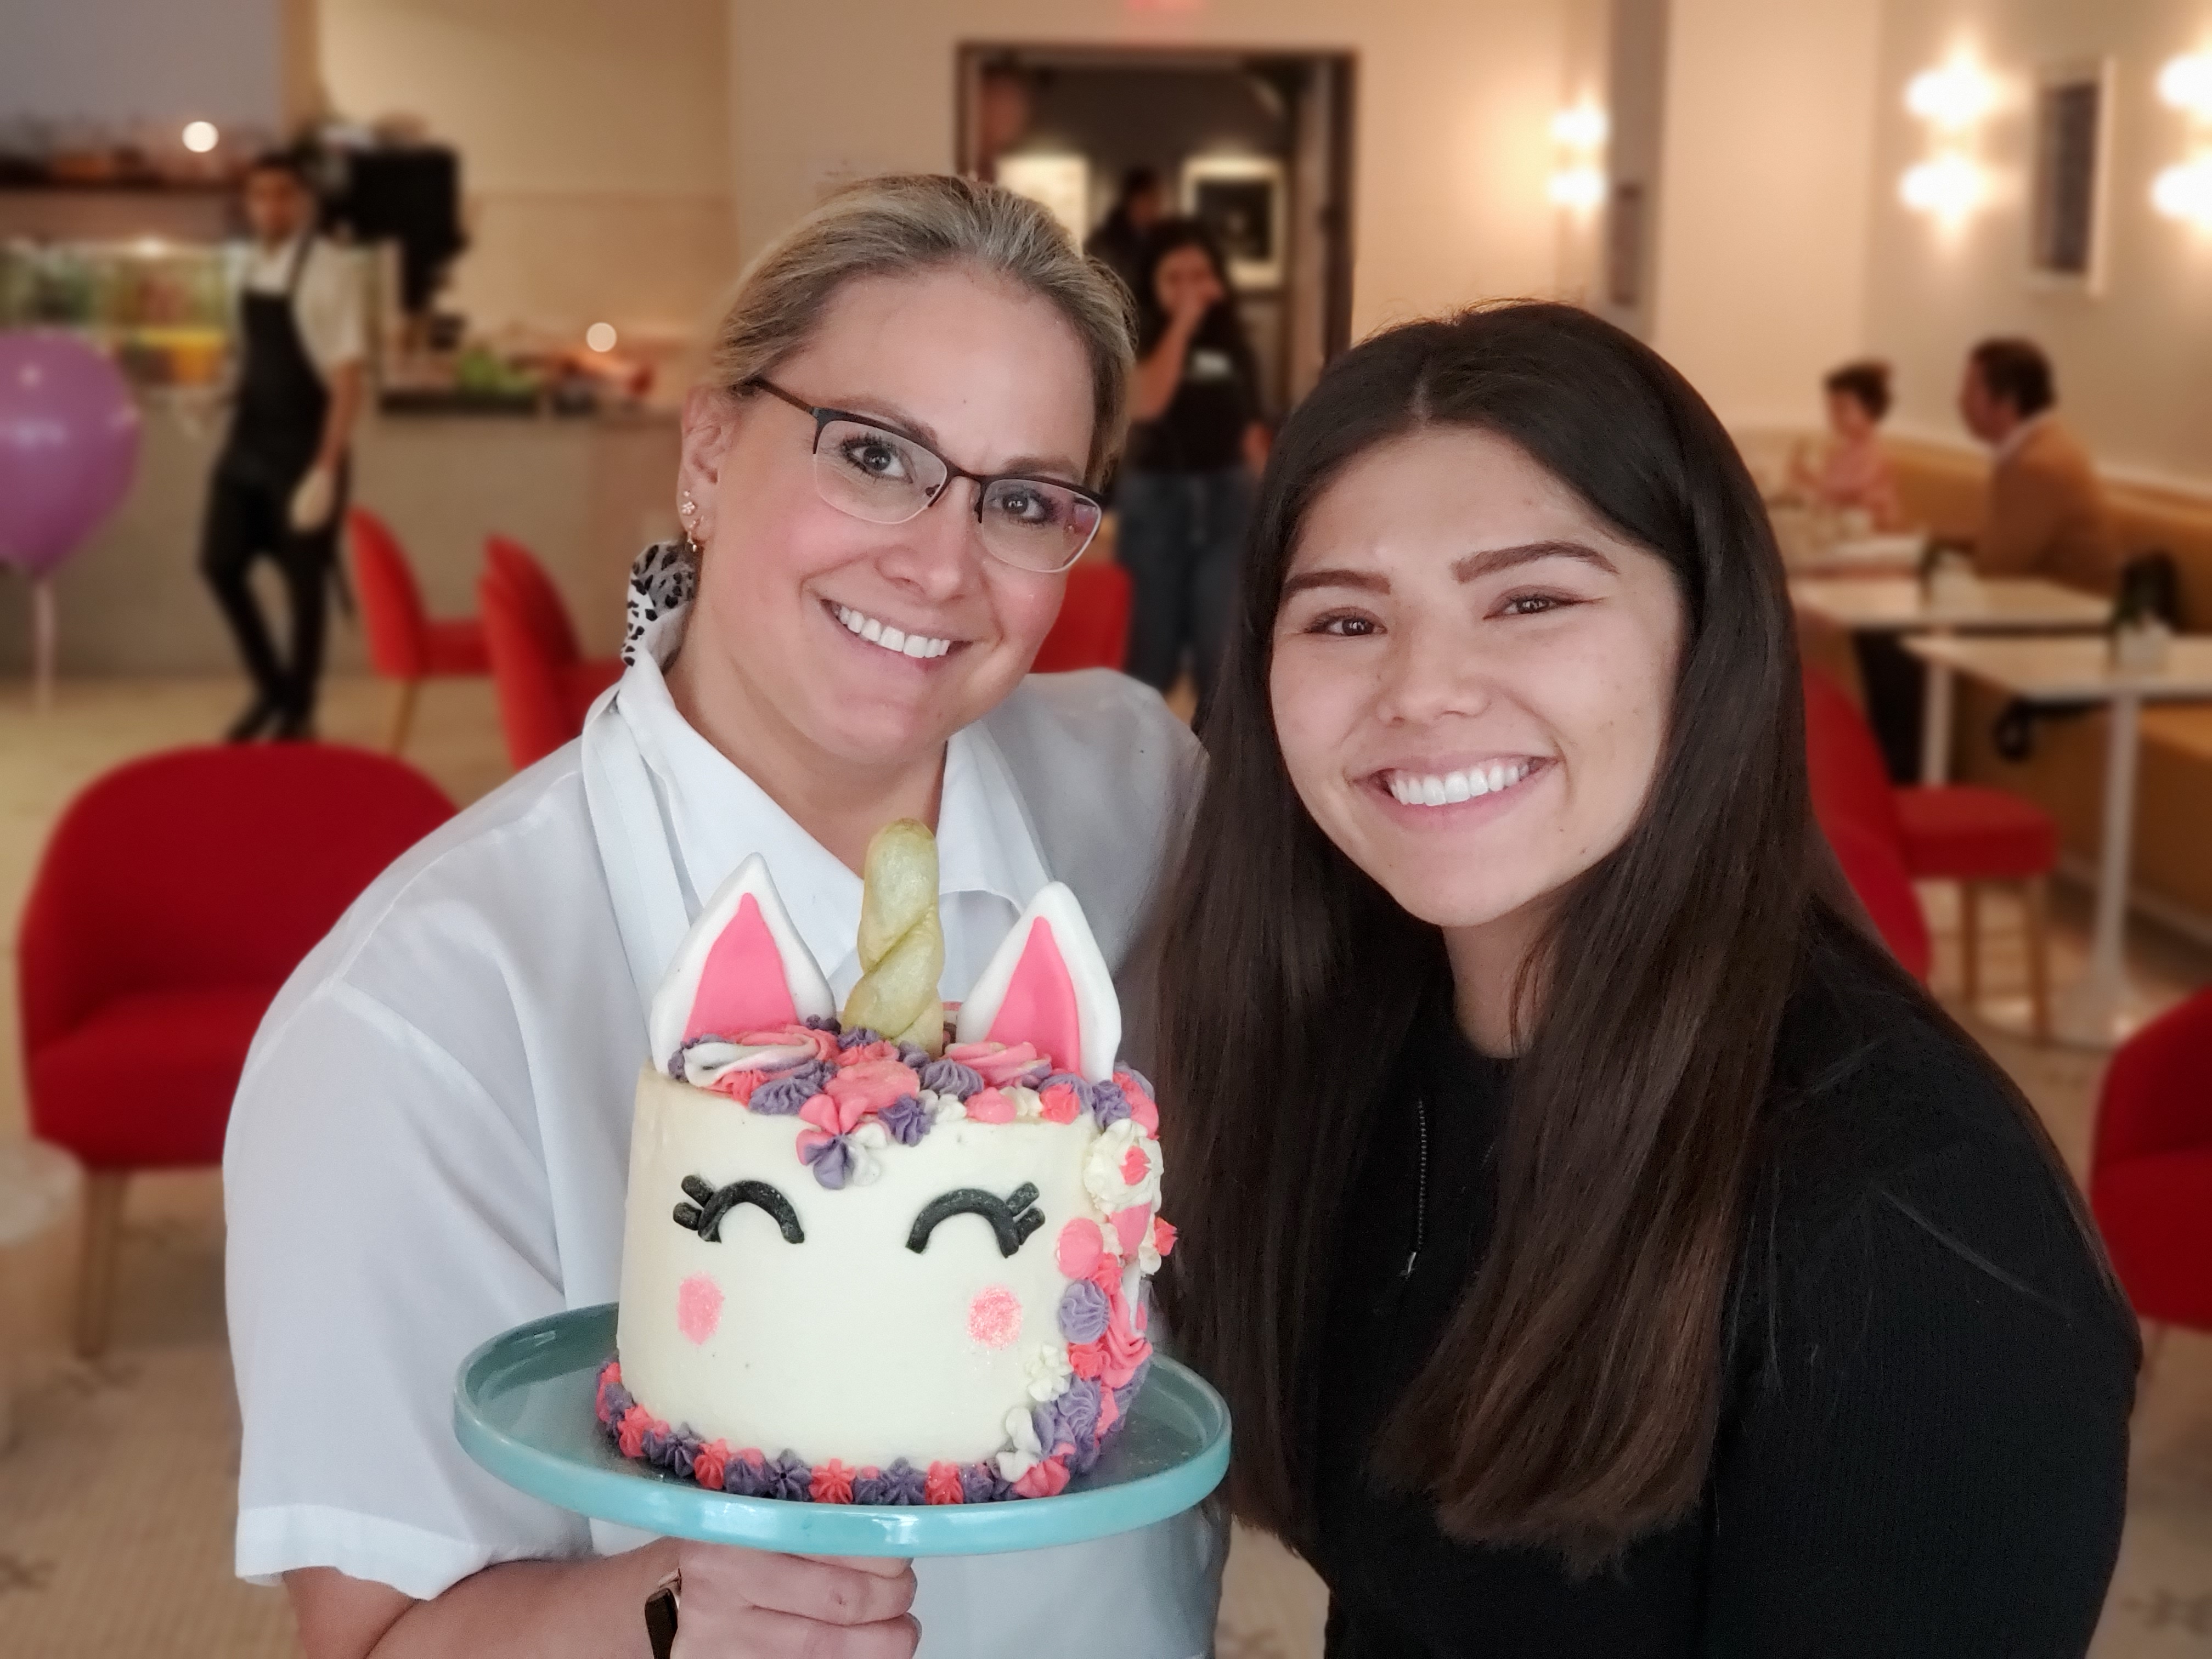 Two women holding a unicorn cake with pink and purple flowered hair and a gold horn. The woman on the left is blonde, her hair pulled back with a white and black polka-dotted bow. Wearing black glasses and a short-sleeved white chef's coat. The woman on the right (me) is a brunette, in an all black peplum zip up sweater. Her hair is down, she is smiling. In the background you can see blurred red chairs and families sitting at cafe table.